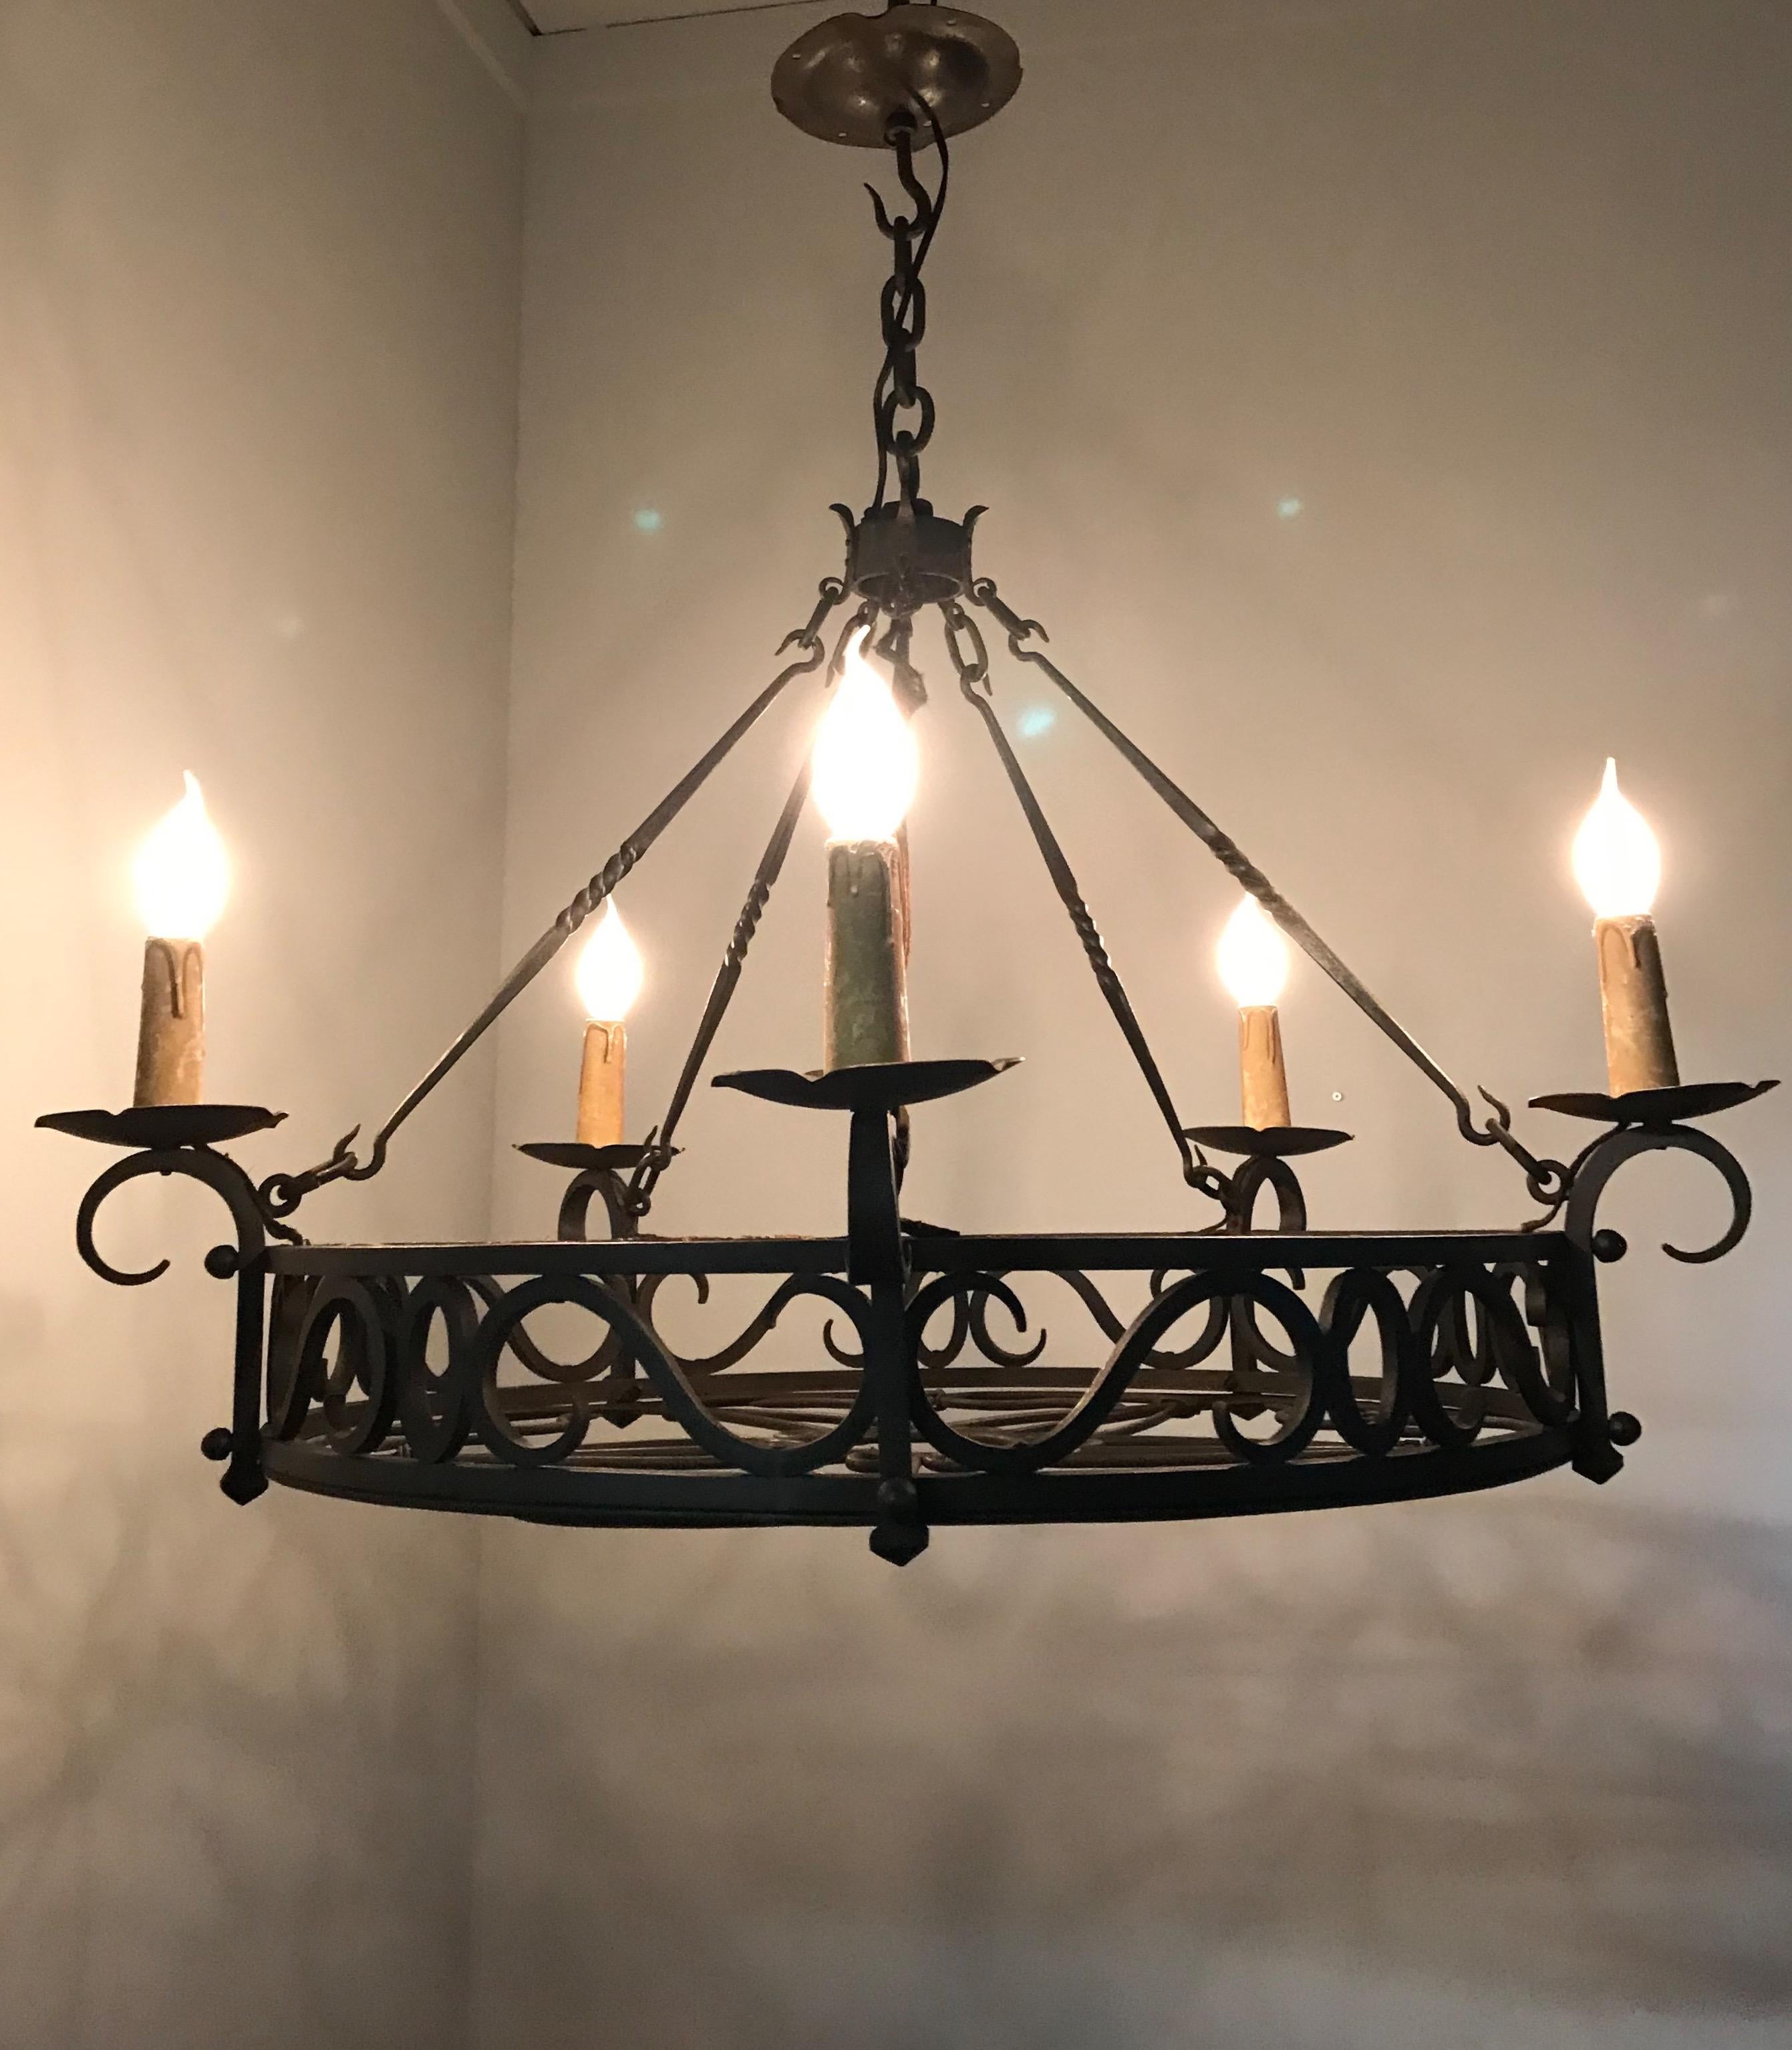 Large Arts & Crafts Wrought Iron Chandelier for Dining Room or Restaurant Etc. 12